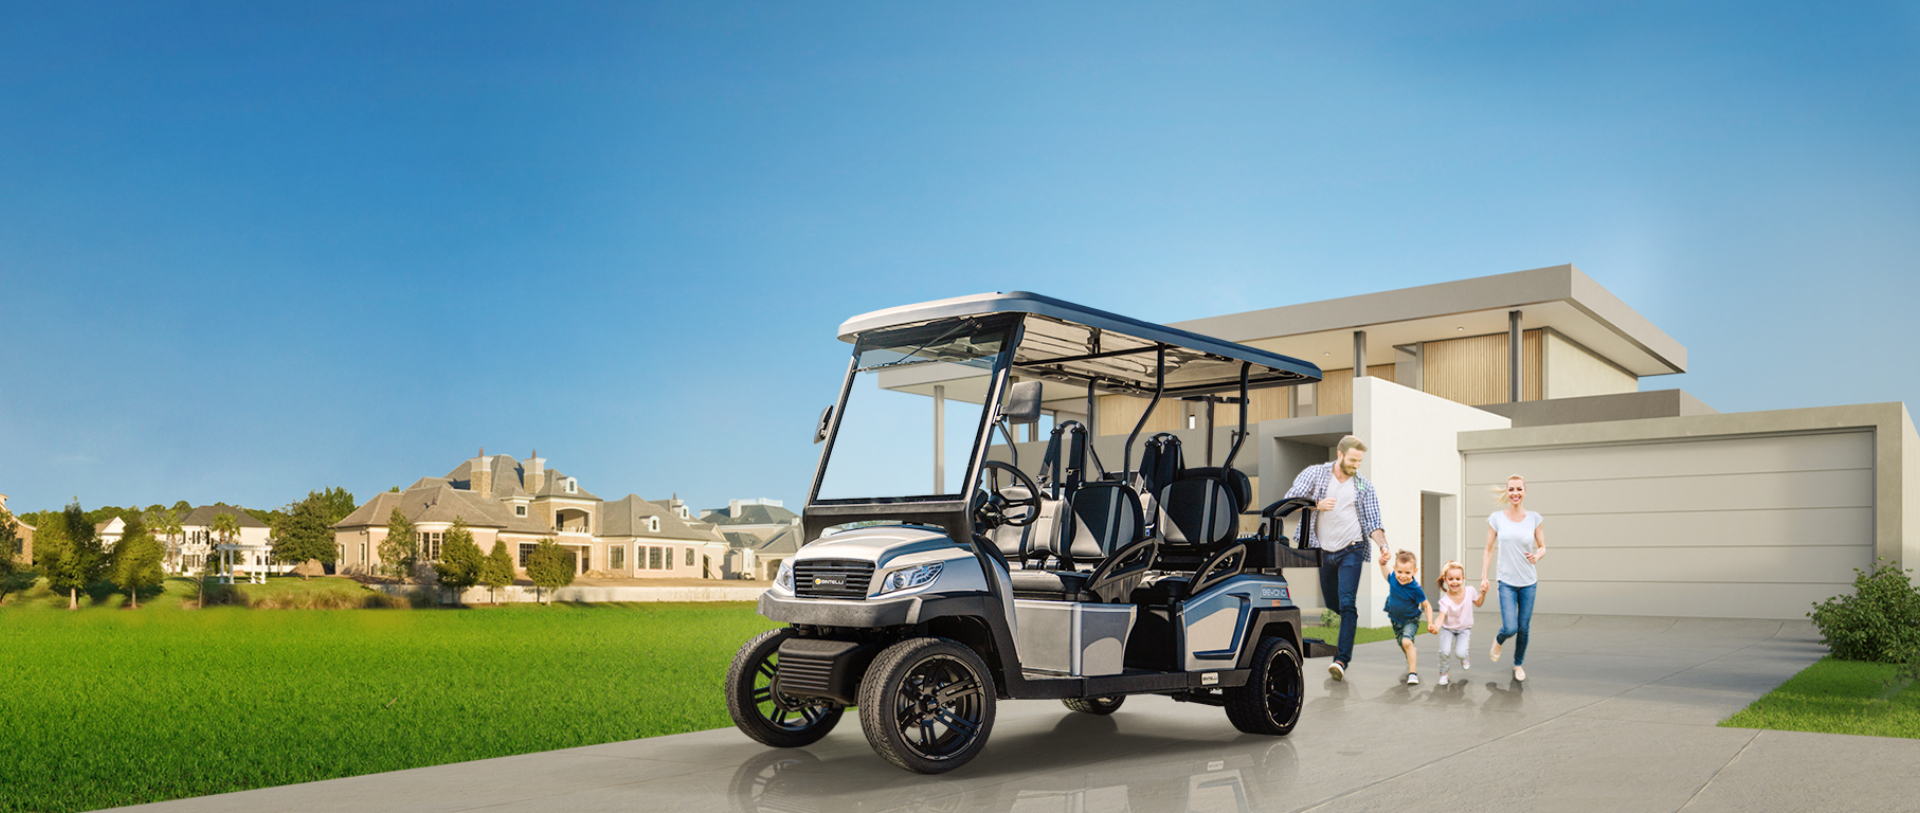 A Family of four enjoying their brand new Bintelli A 6 seater street legal golf cart in Titanium parked on their driveway